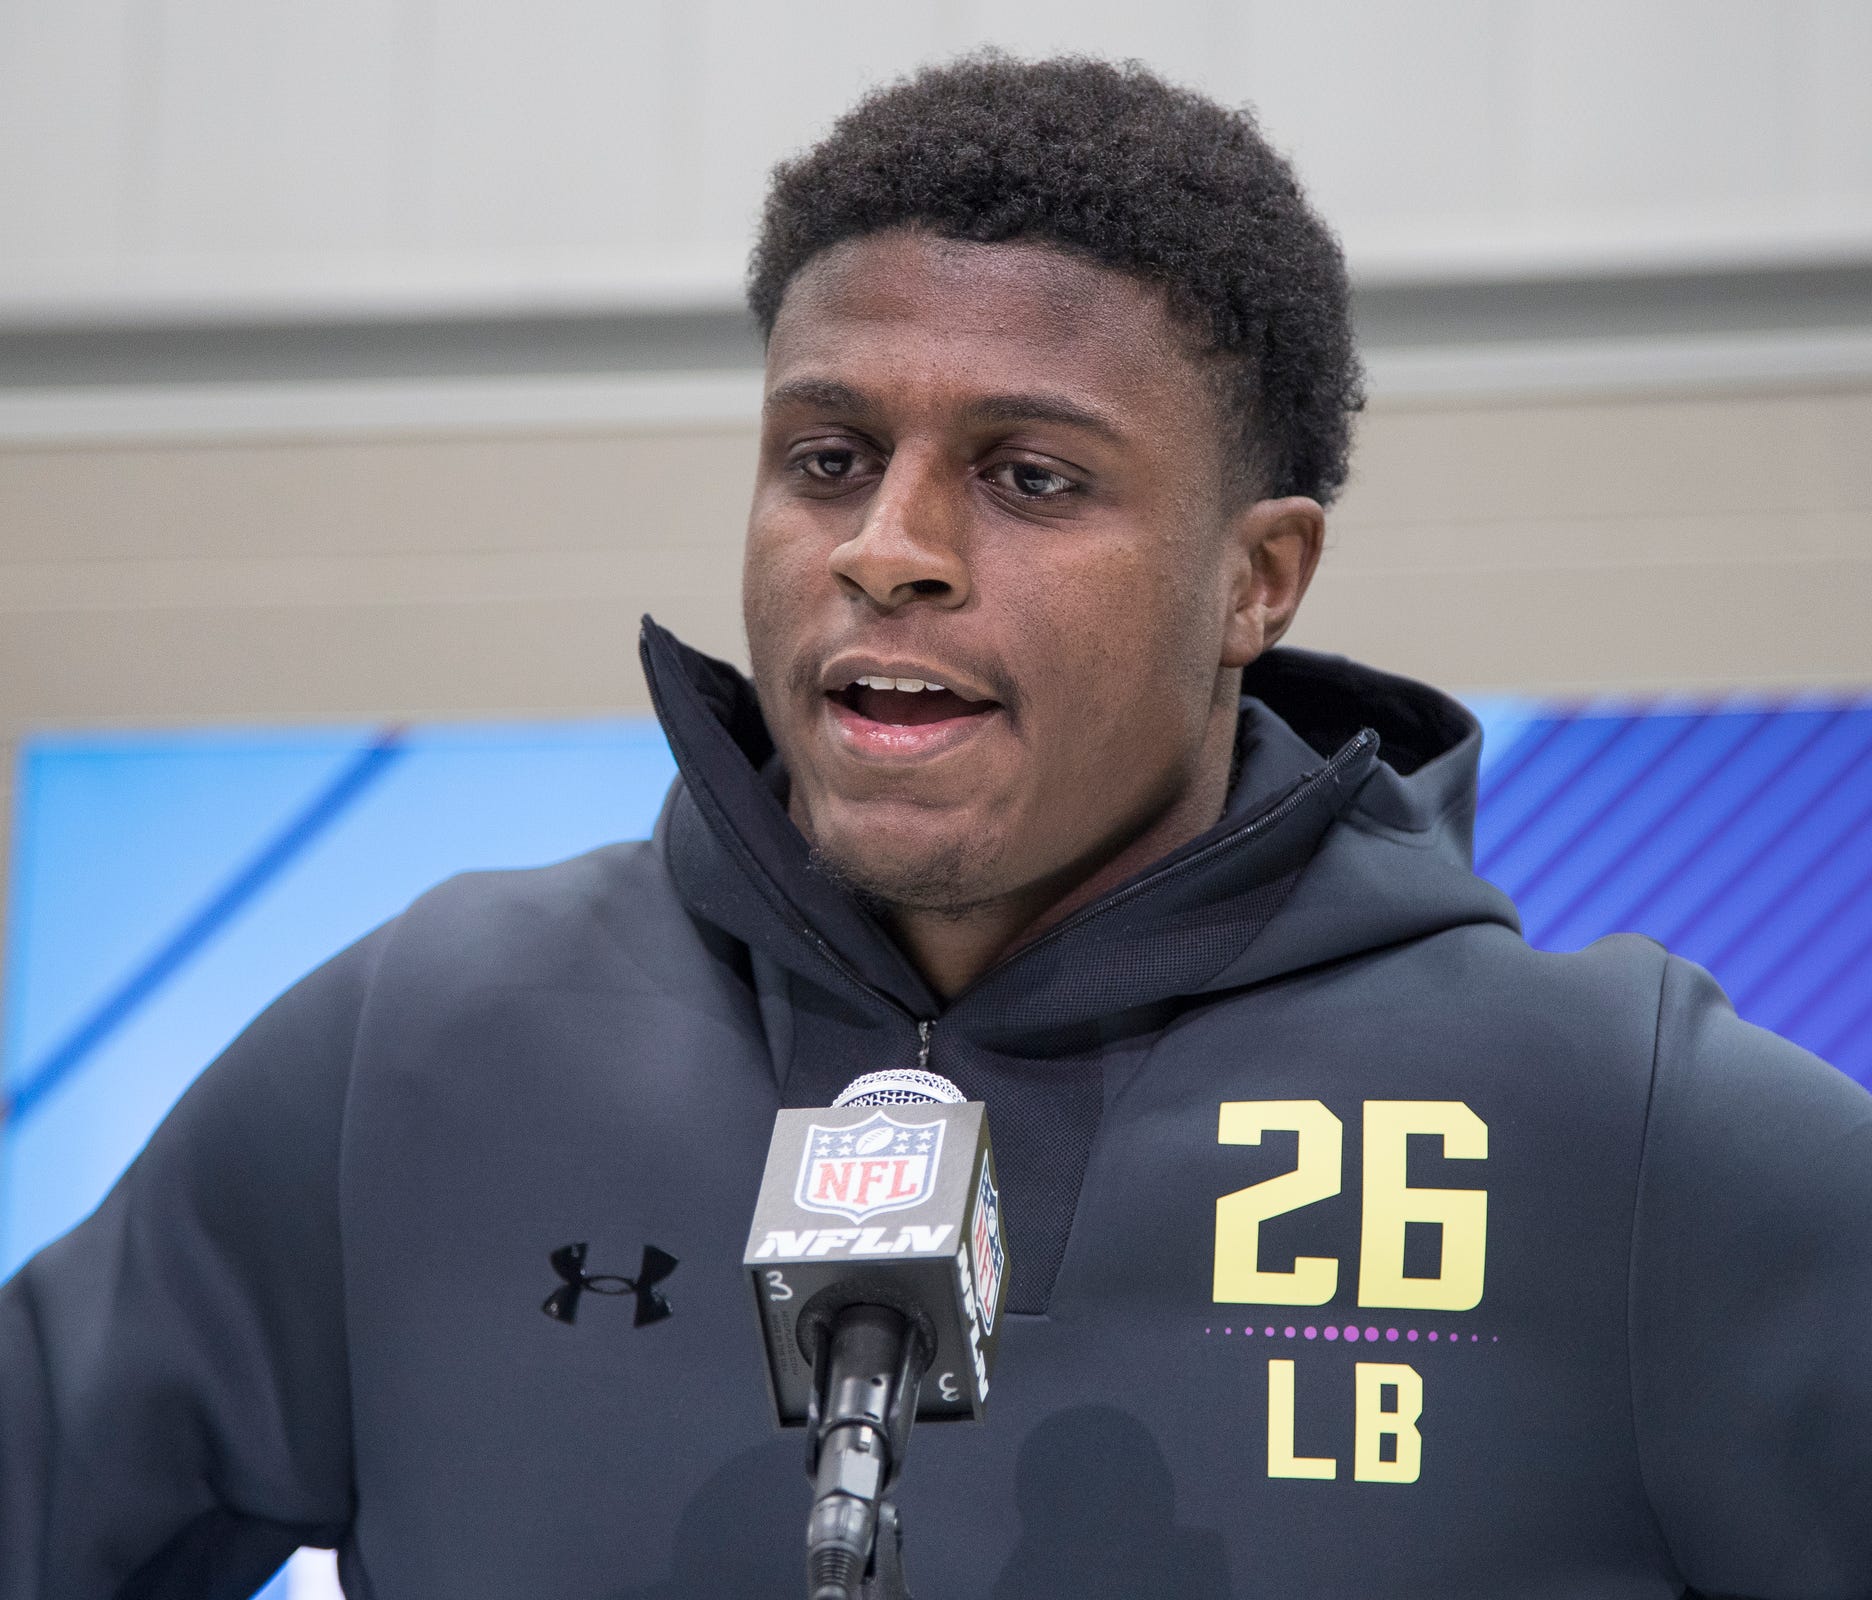 Mike McCray, former Michigan linebacker, answers a question during the NFL combine in Indianapolis on March 3, 2018.